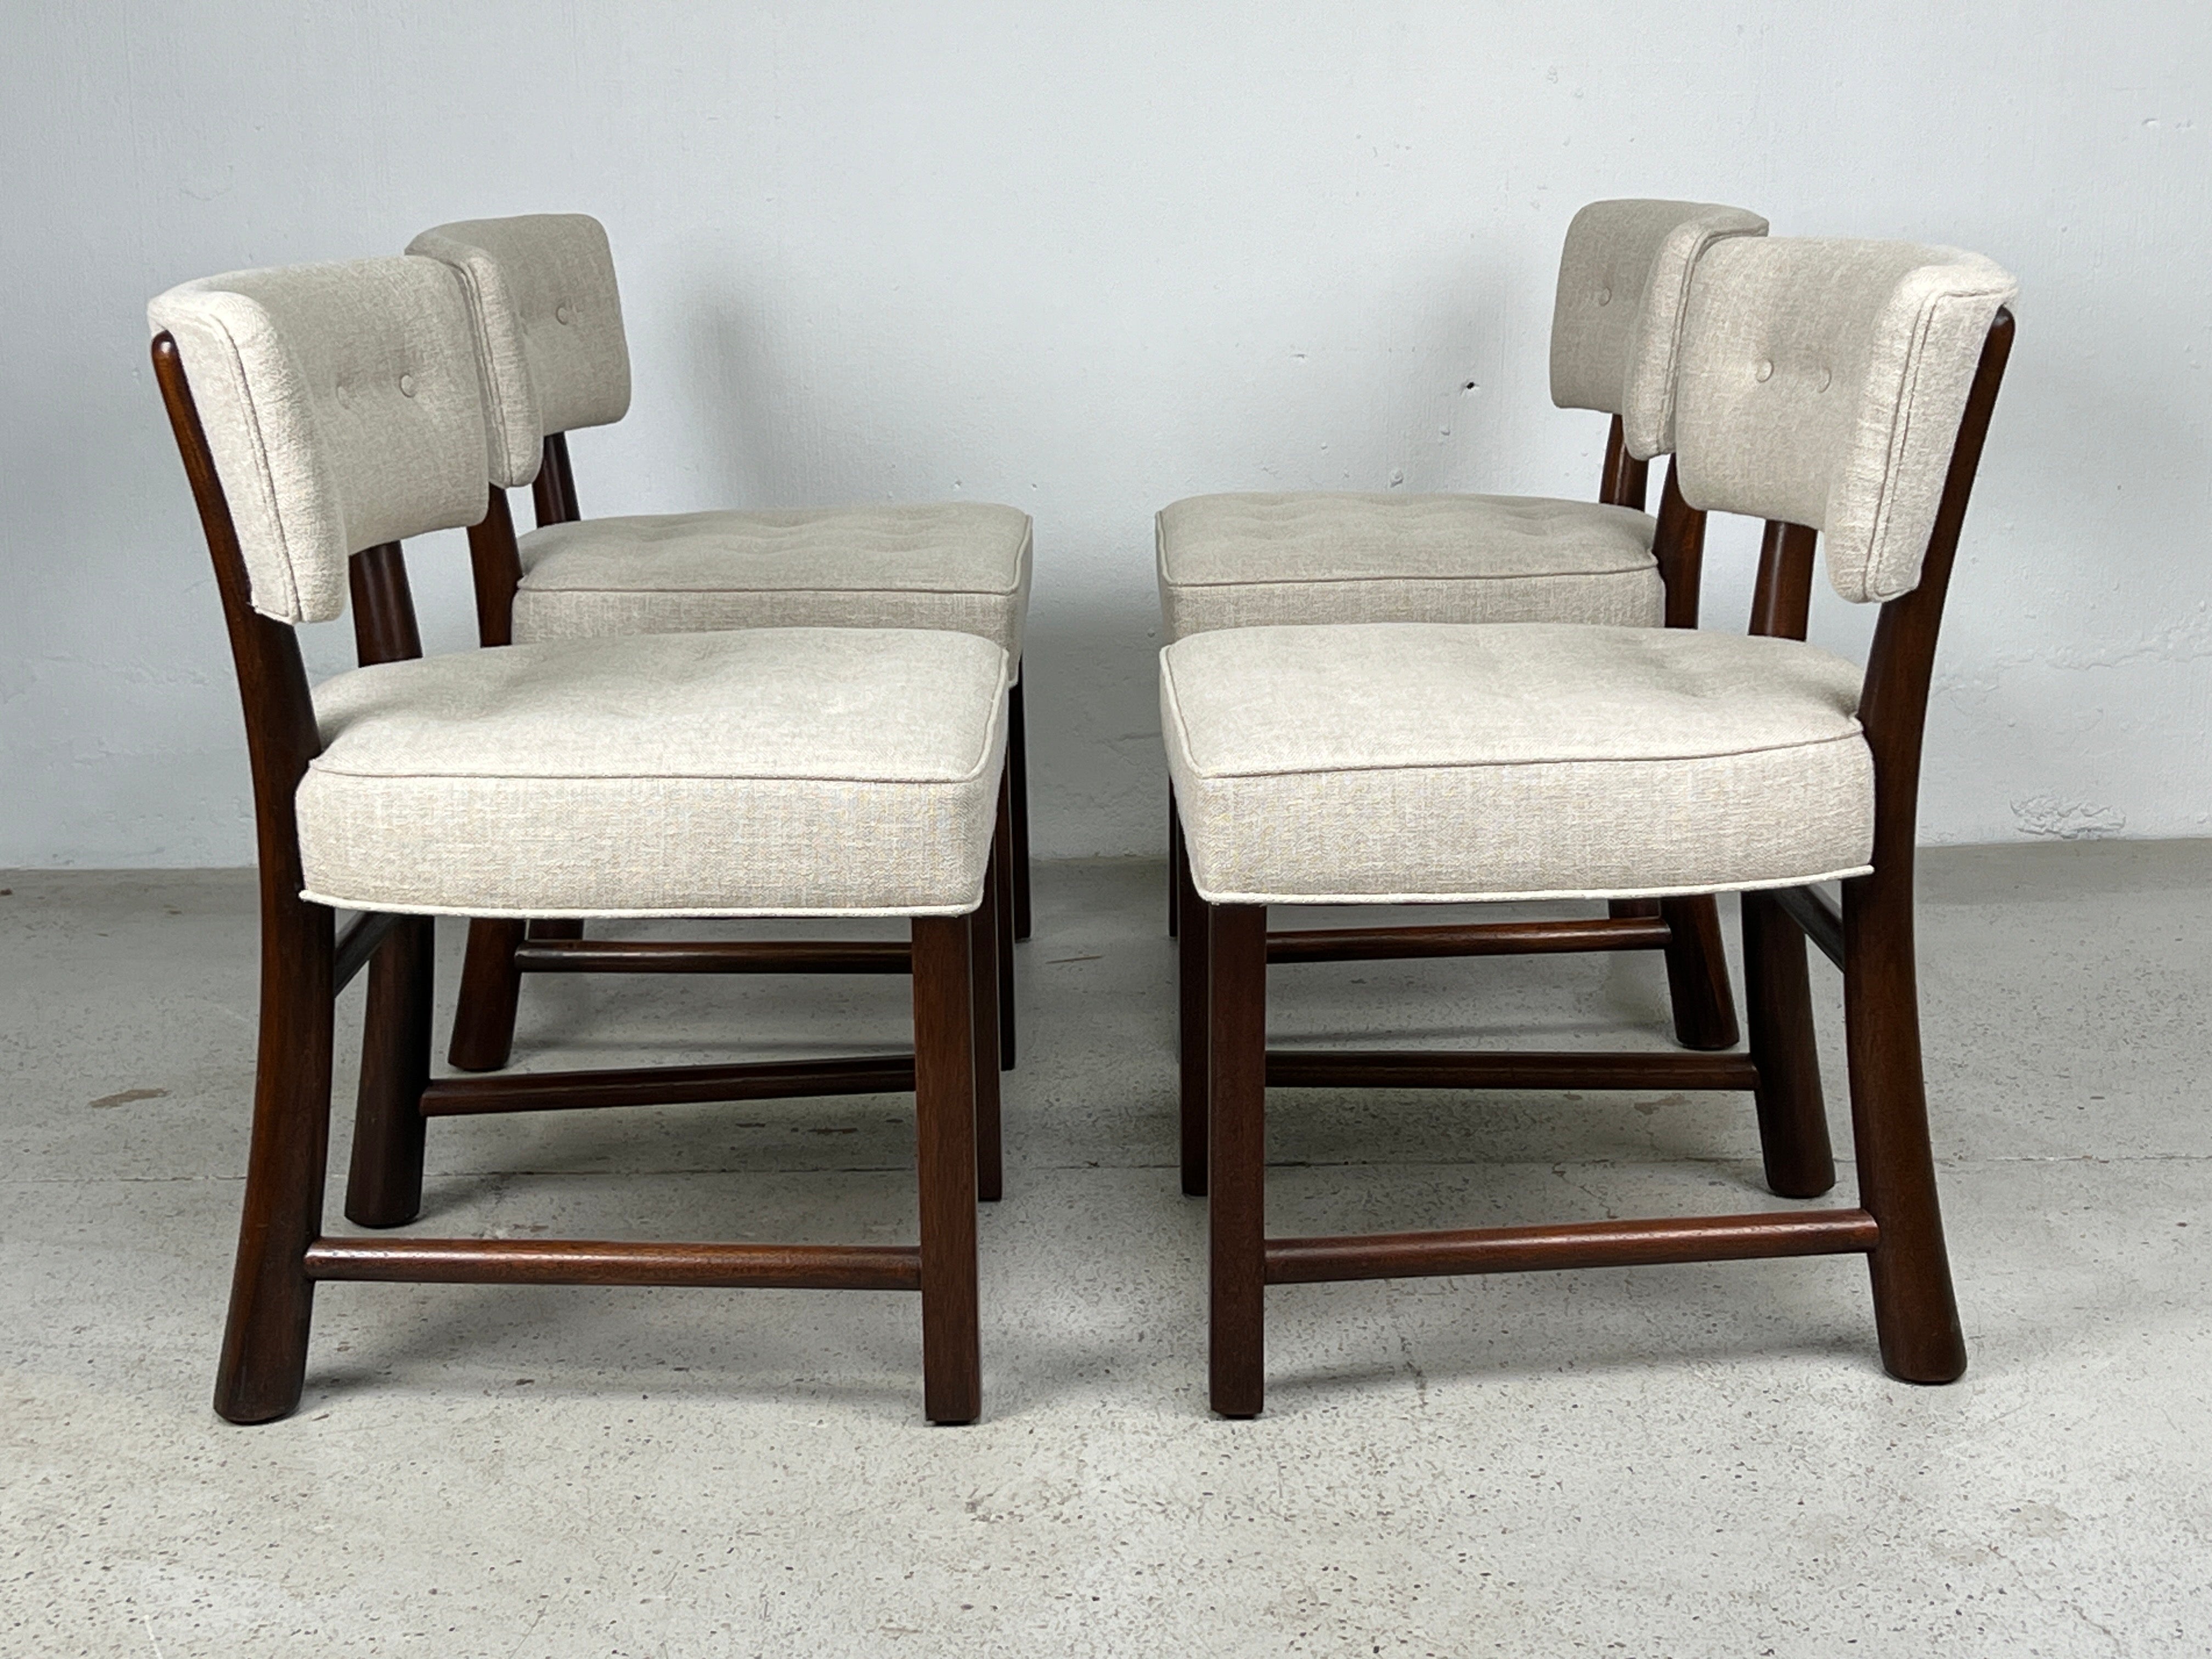 A set of four curved back dining chairs with mahogany frames. Designed by Edward Wormley for Dunbar.